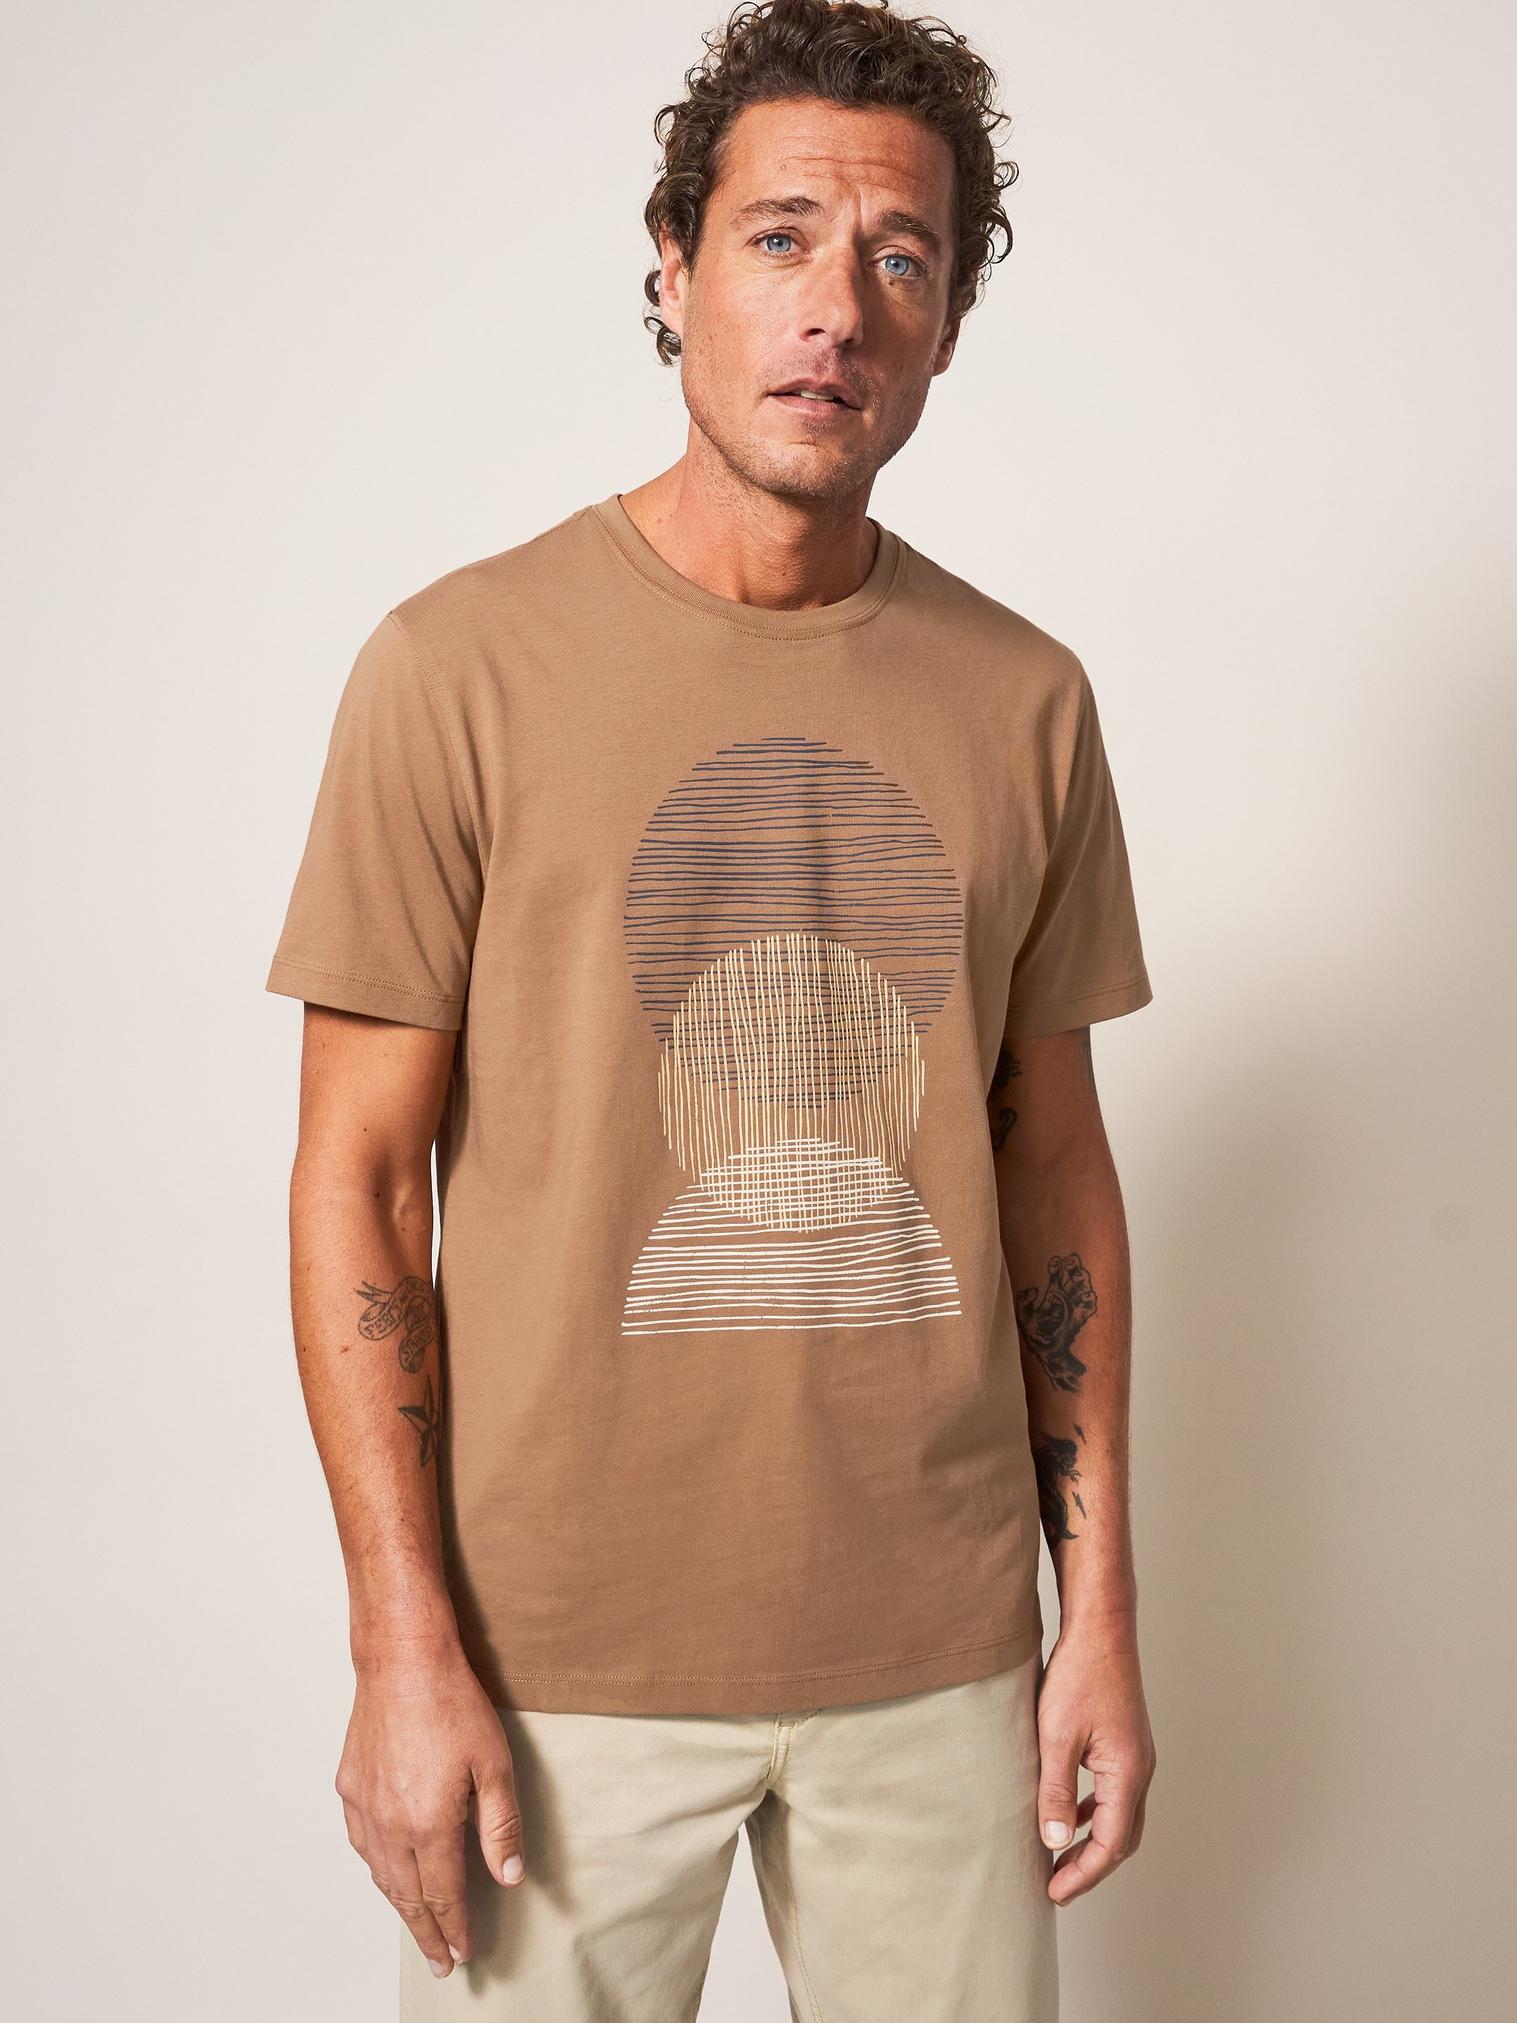 Abstract Art Graphic Tee in MID BROWN - LIFESTYLE